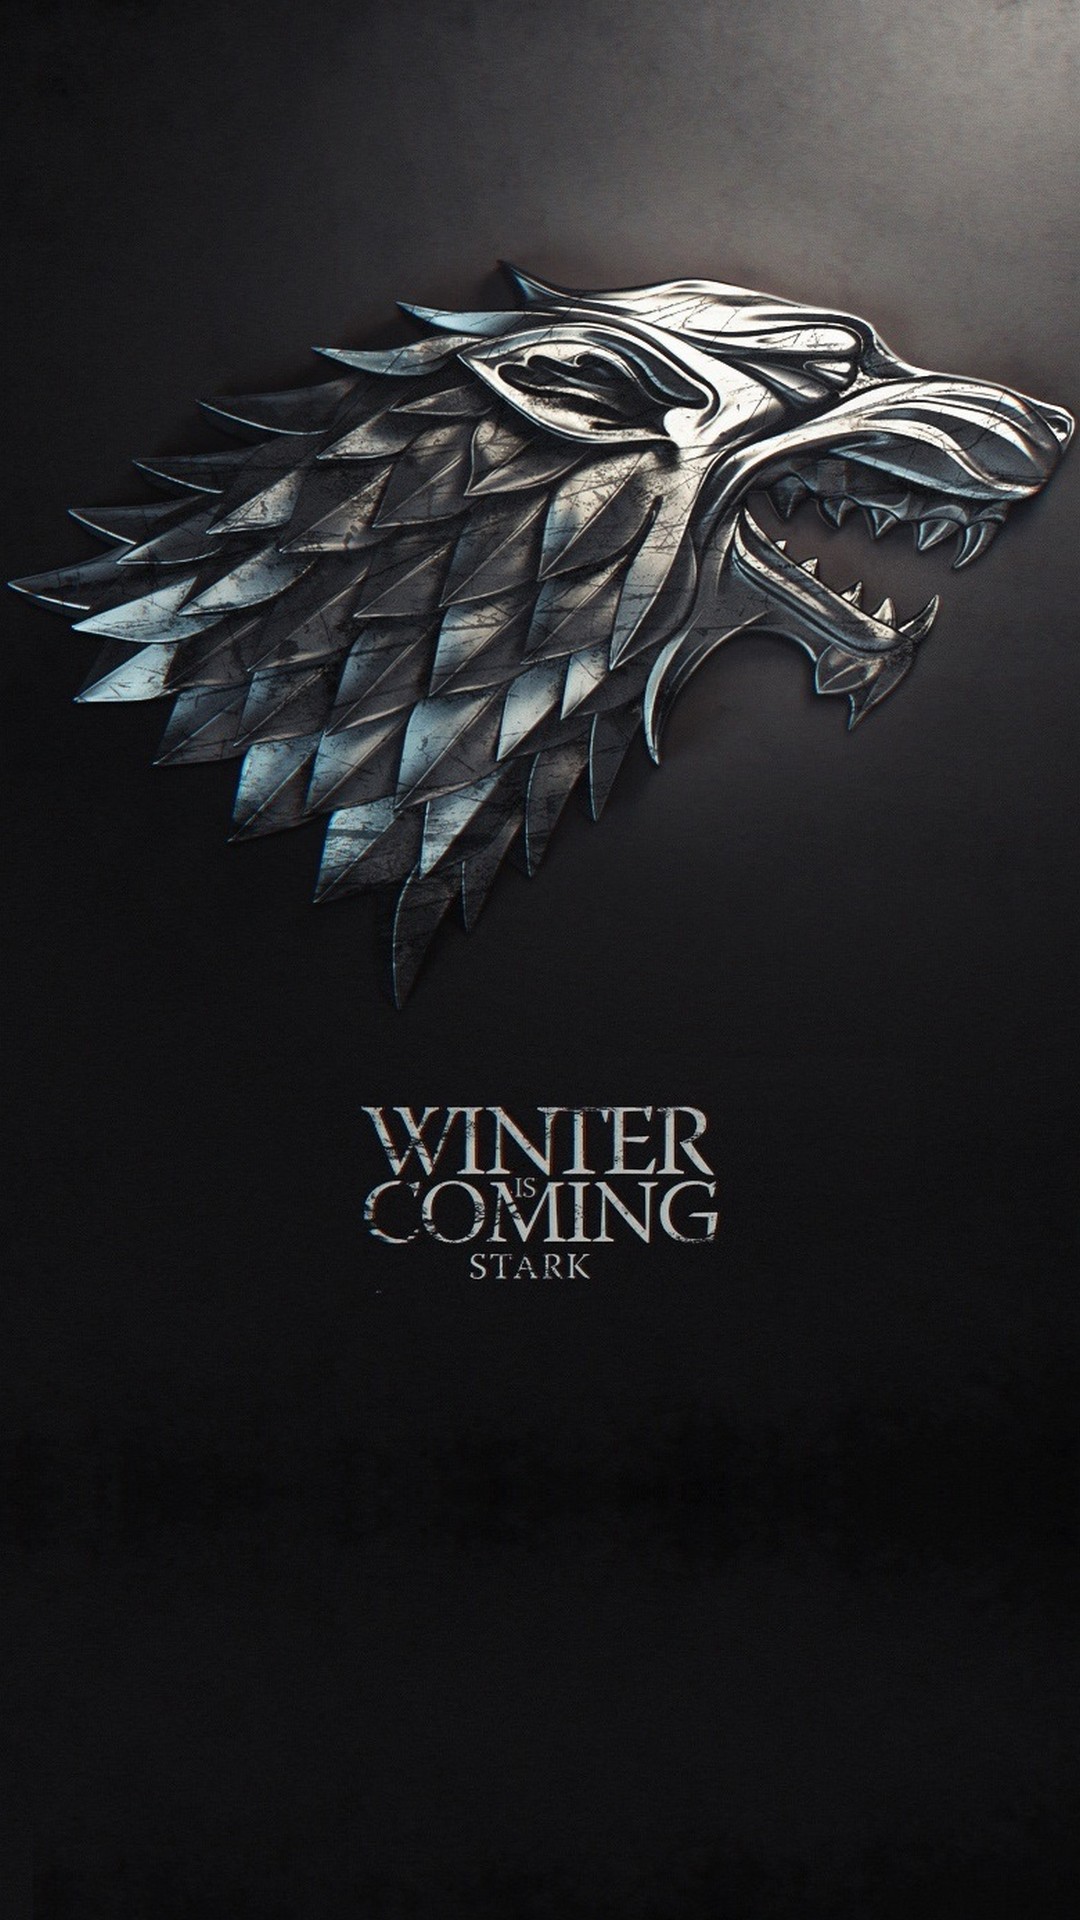 House Stark Game of Thrones Android Wallpaper With high-resolution 1080X1920 pixel. You can use this wallpaper for your Android backgrounds, Tablet, Samsung Screensavers, Mobile Phone Lock Screen and another Smartphones device